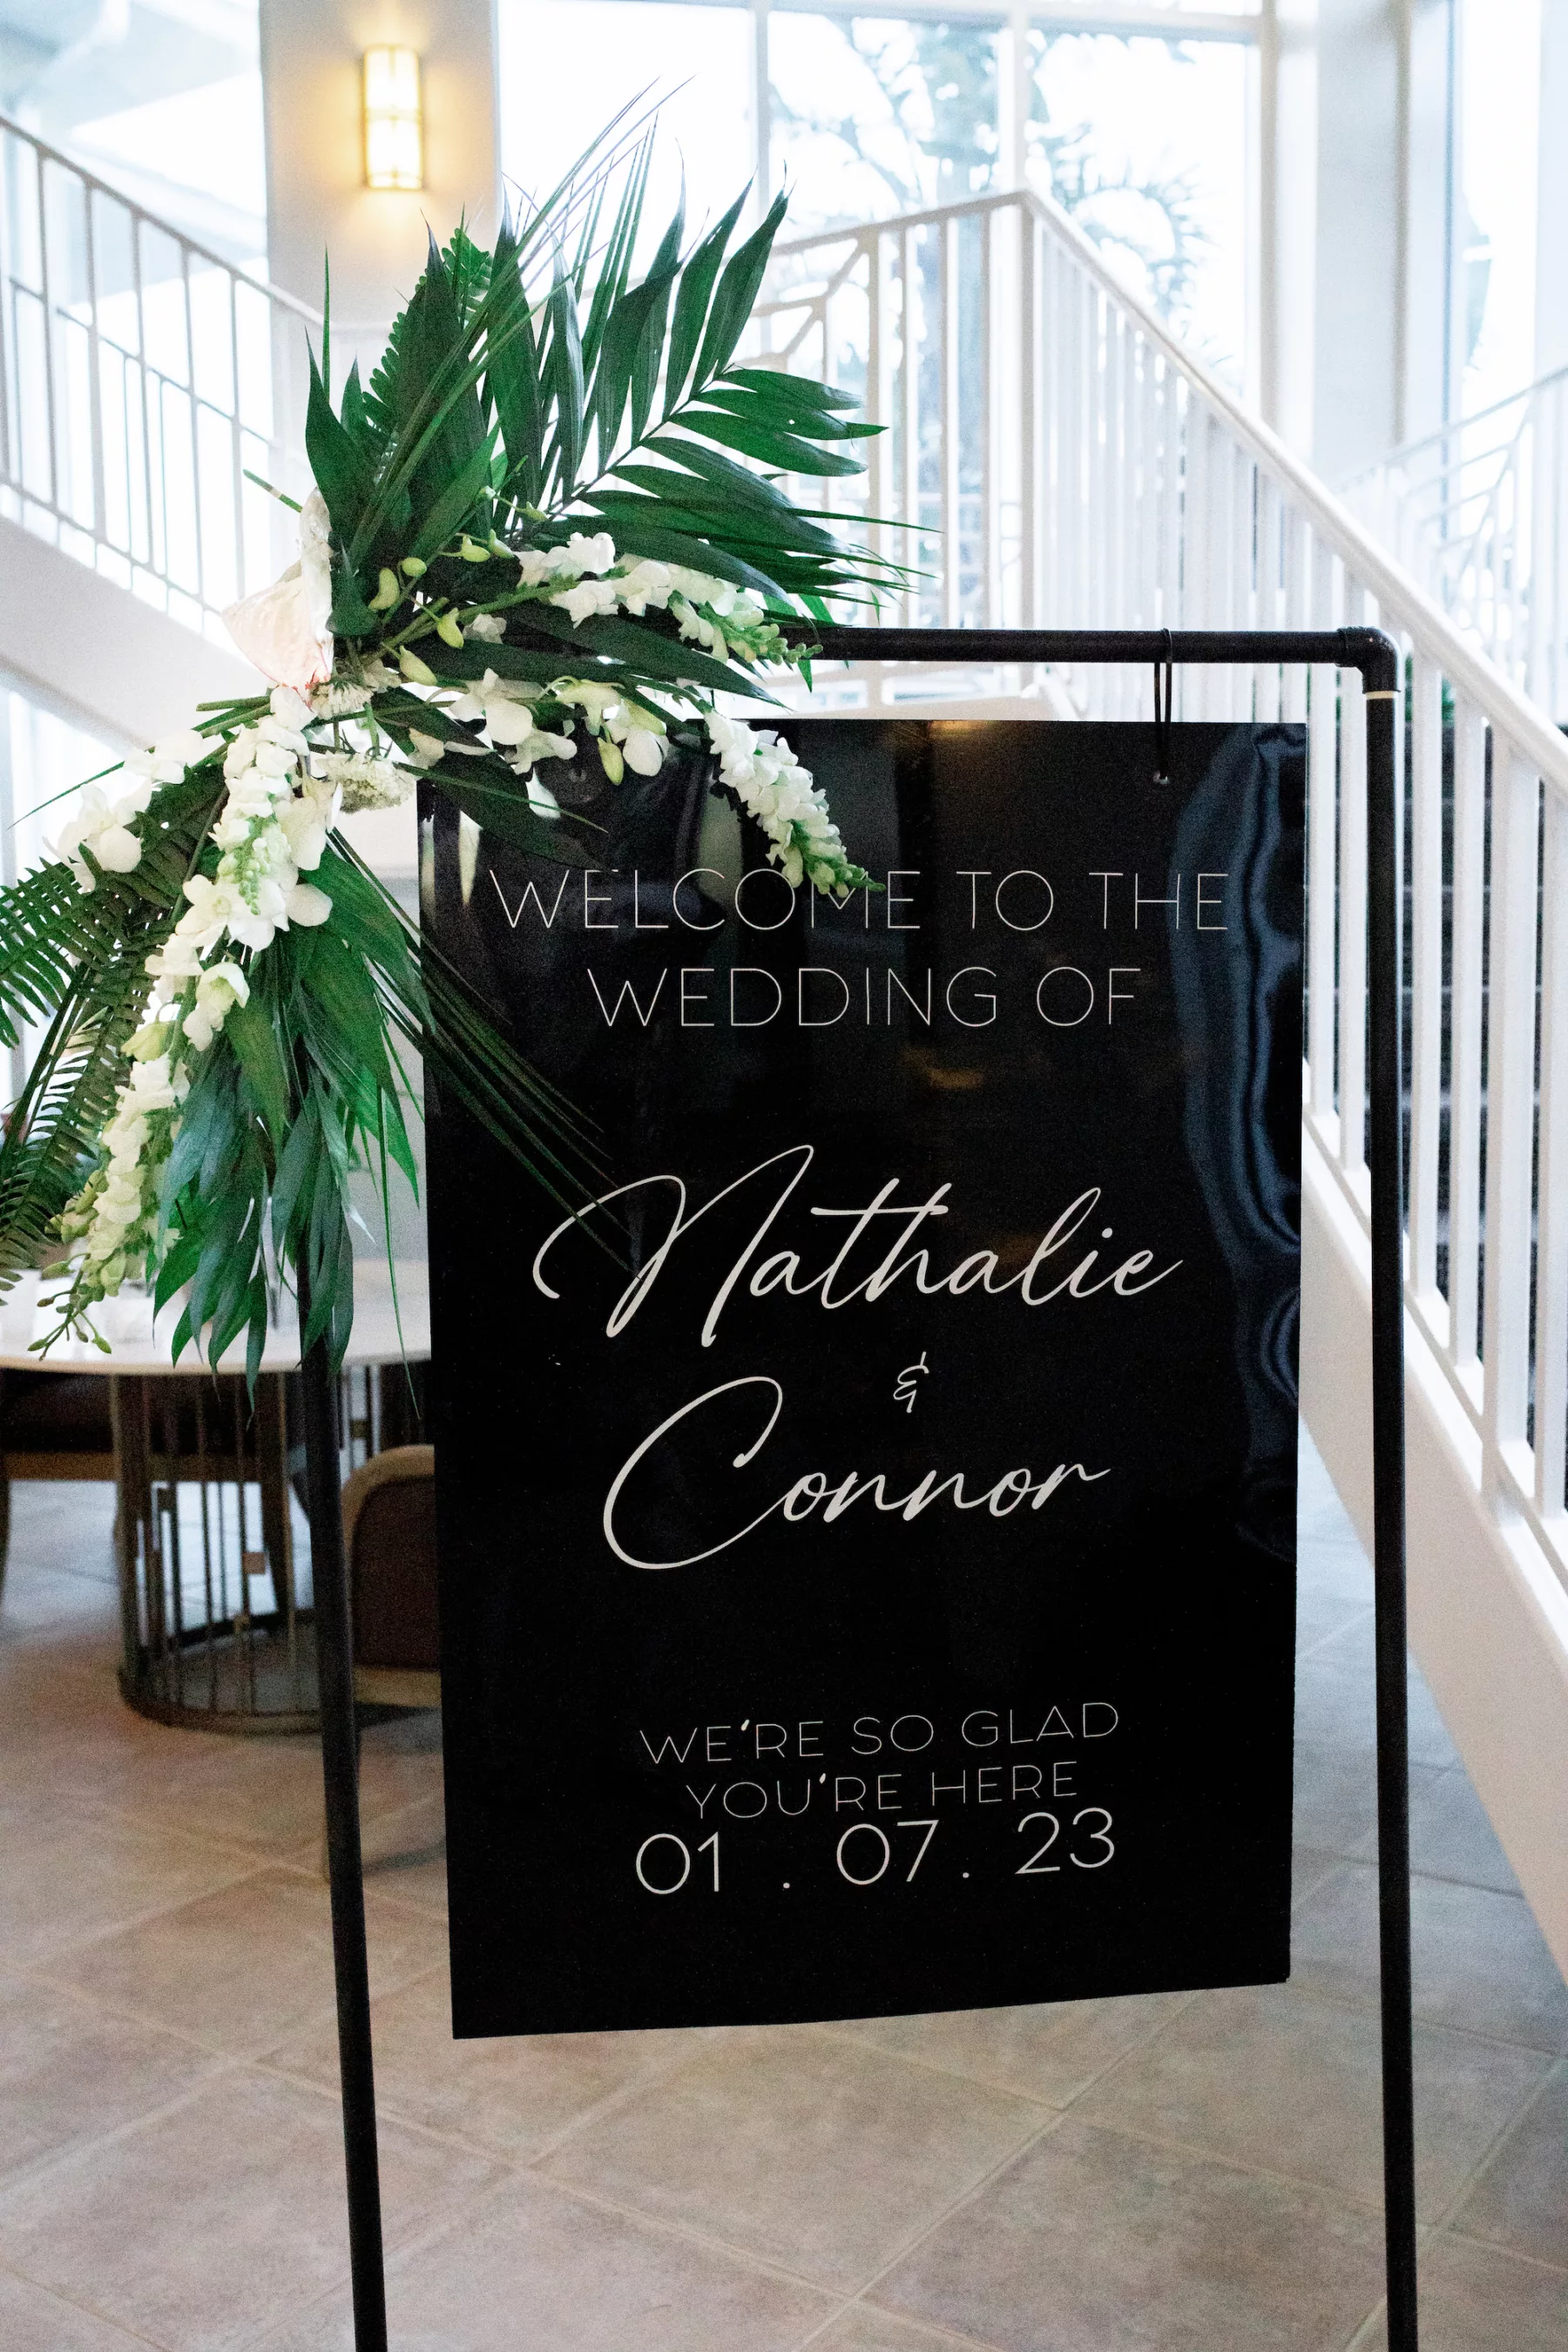 Modern Black and White Welcome Wedding Ceremony Sign Ideas | Tropical Flower Arrangement with Palm Leaves, Fern, and White Snap Dragon